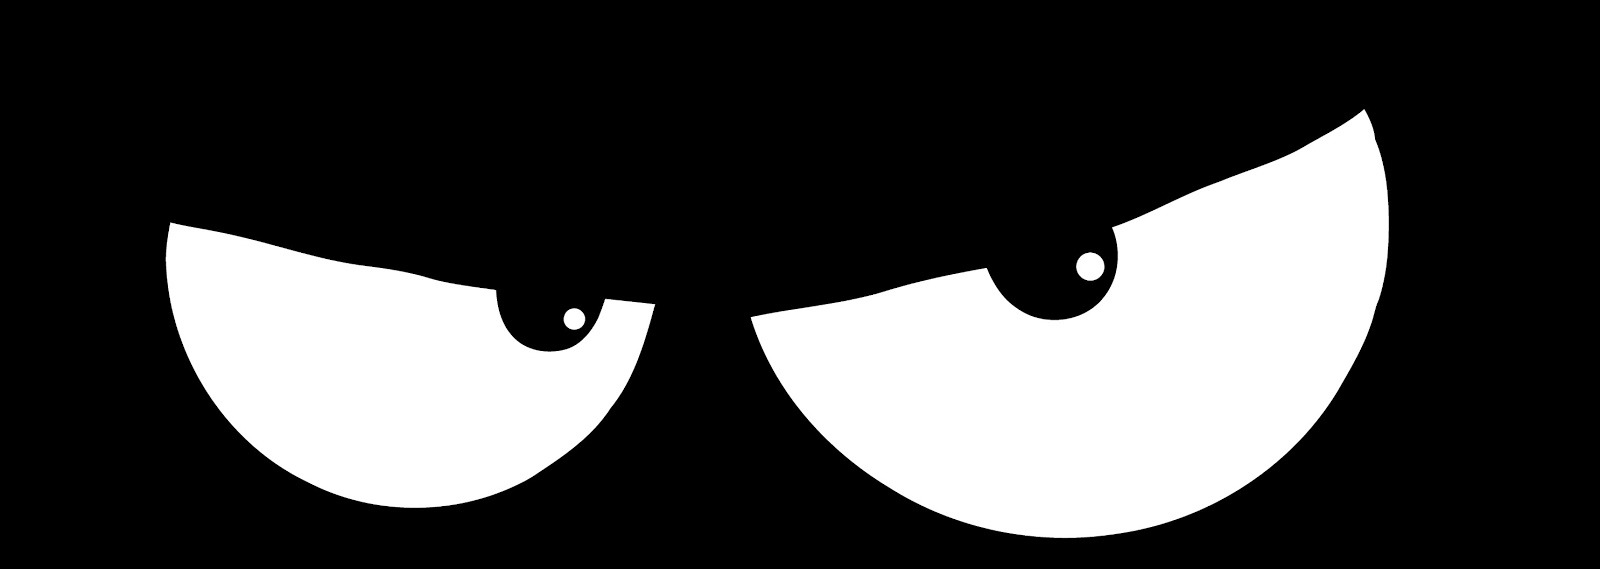 free clipart angry eyes - photo #44